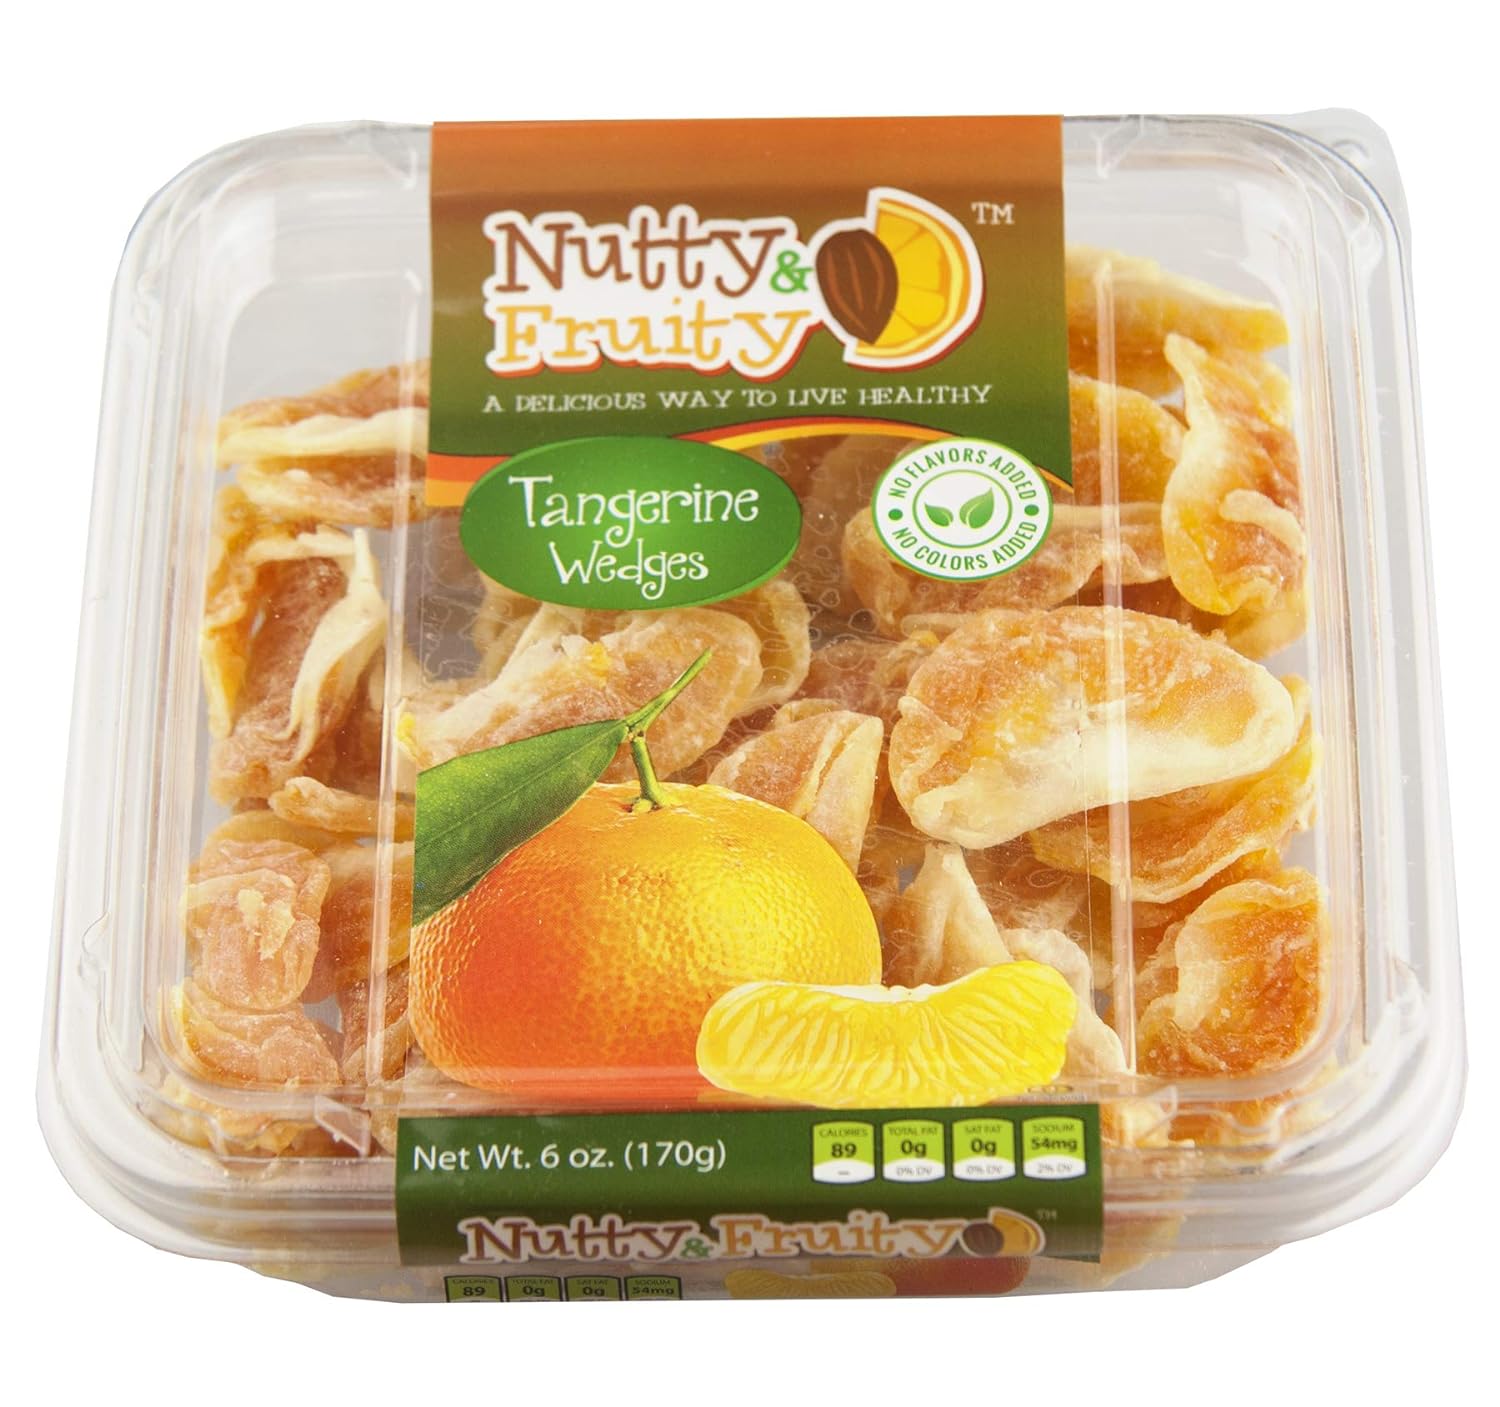 Nutty & Fruity Dried Fruit: Your Choice of Peaches, Strawberries, Cantaloupe or Tangerines- Two Packages (Tangerines 7oz